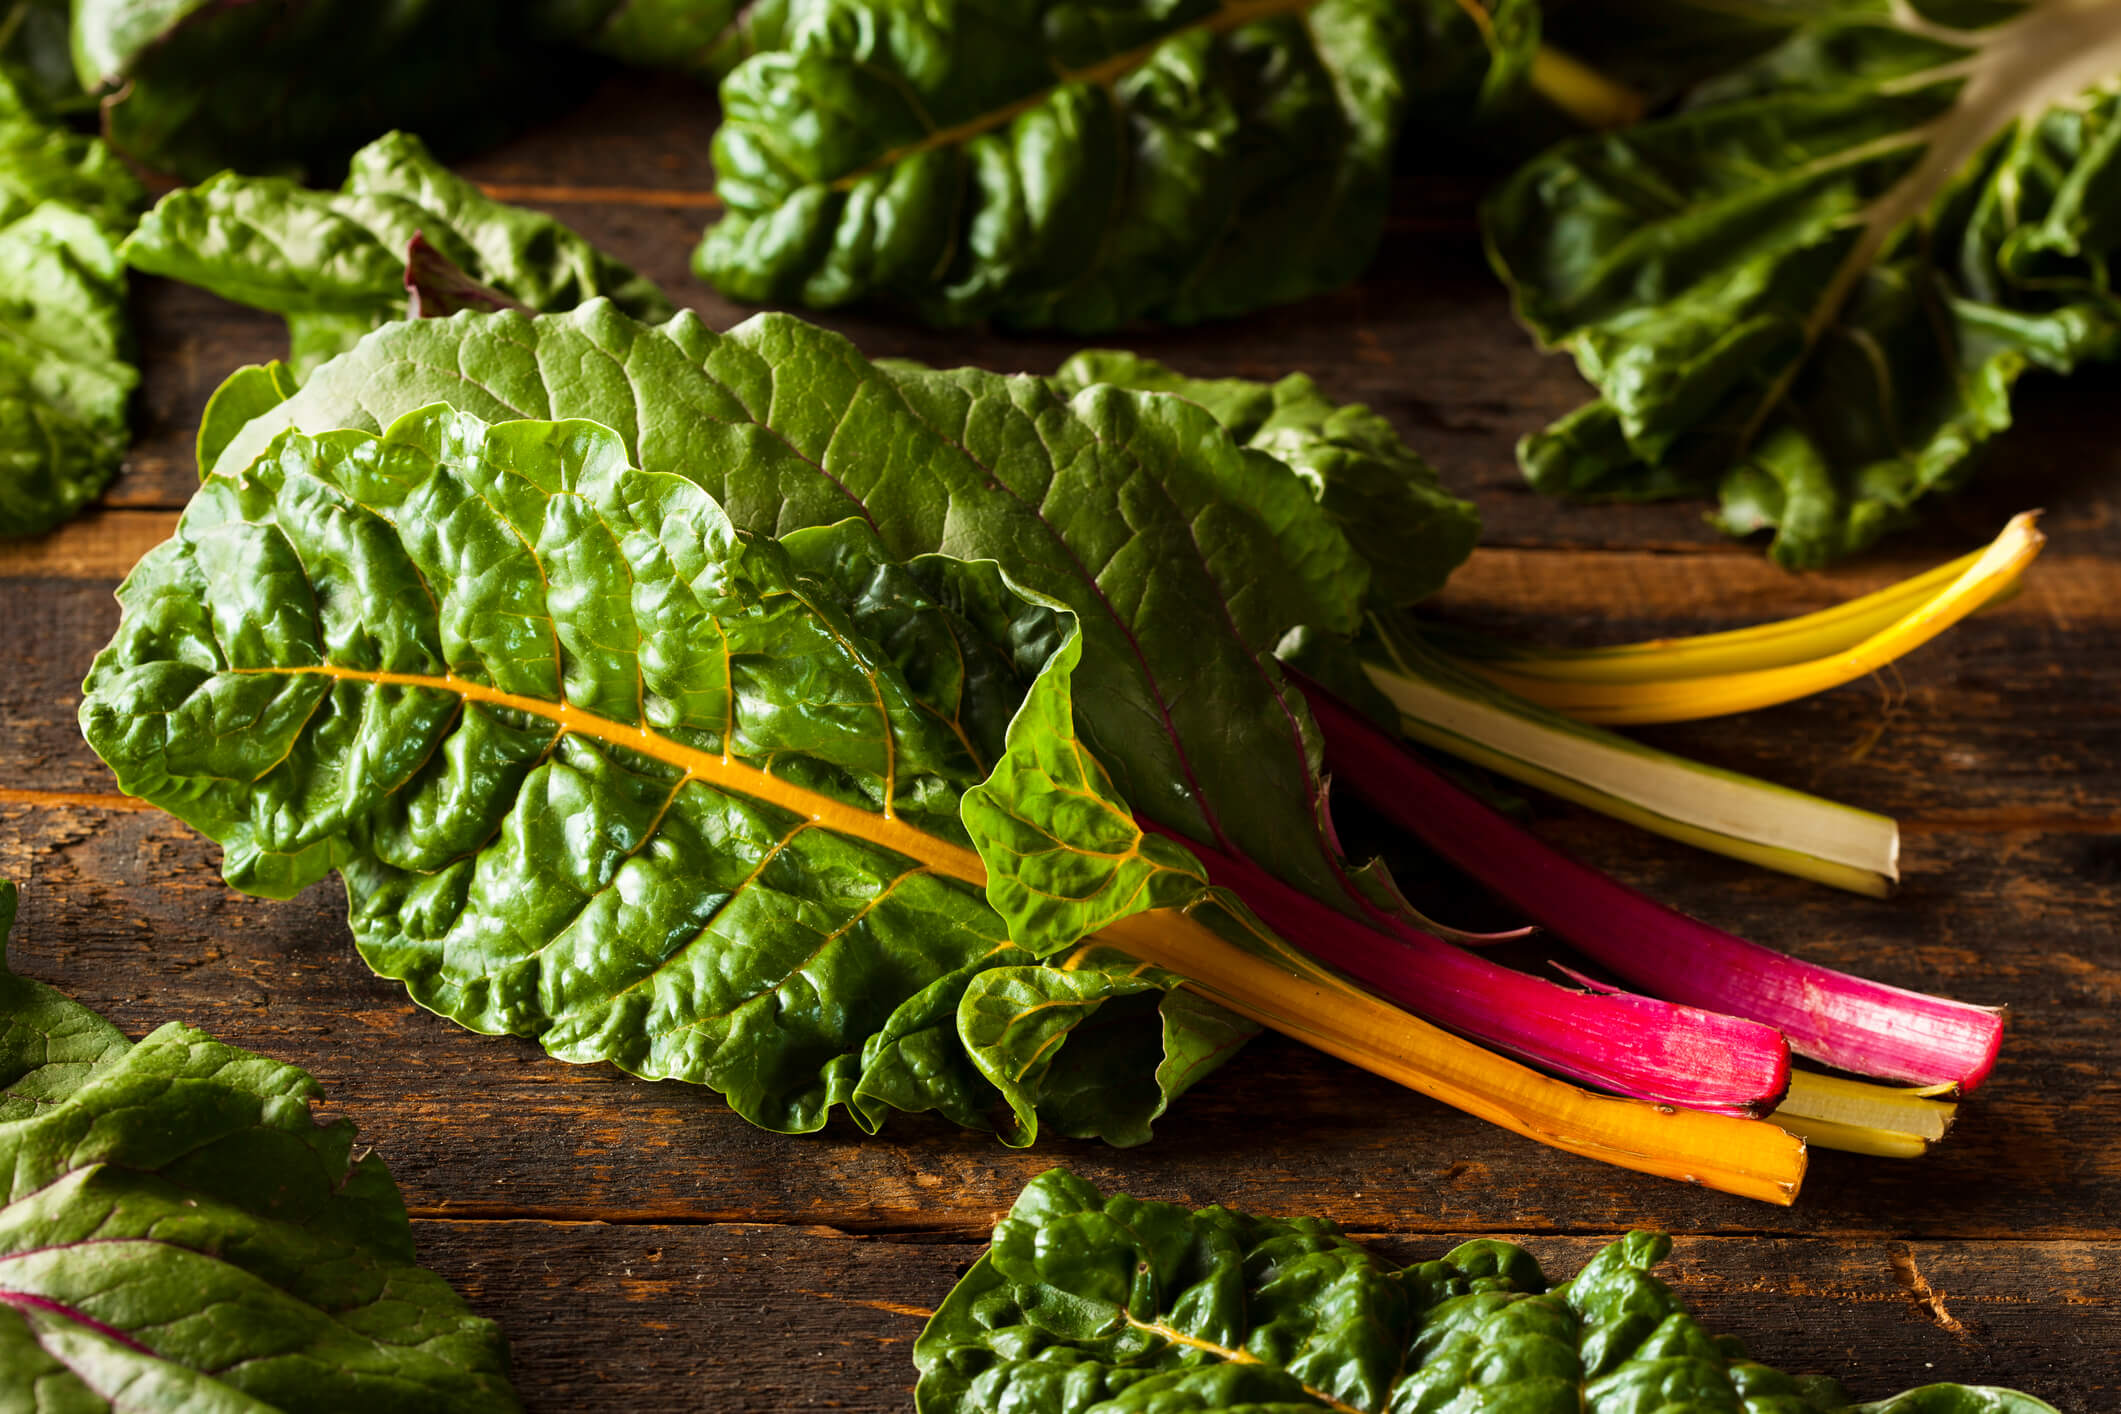 Spring vegetables and fruits: rainbow chard